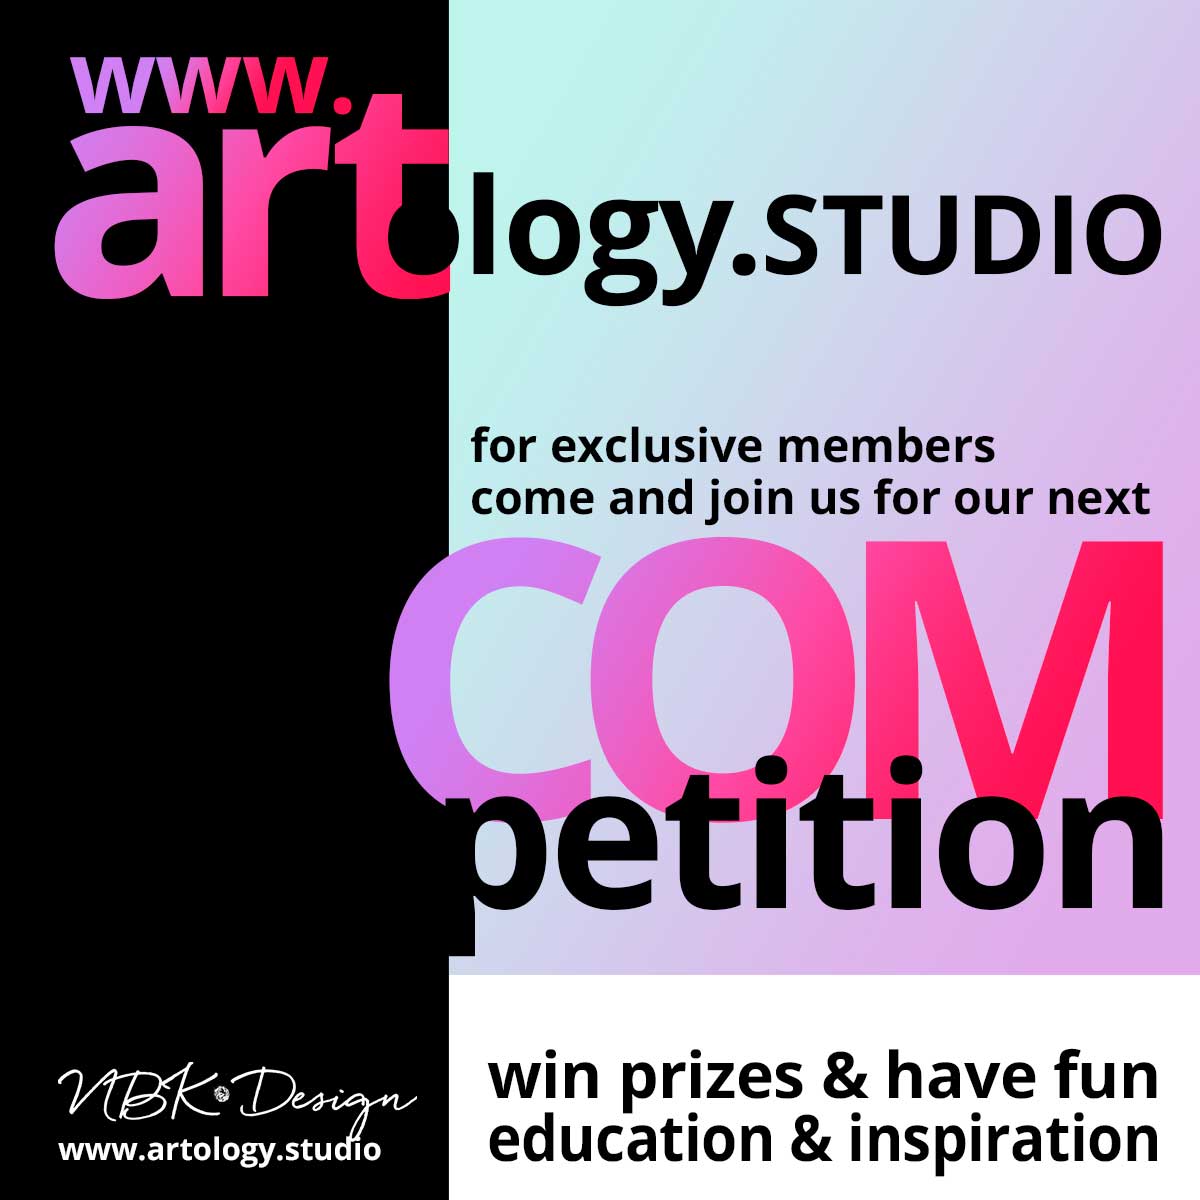 Competition @ the artology.studio – win a 5 $ Coupon to the NBK Design store